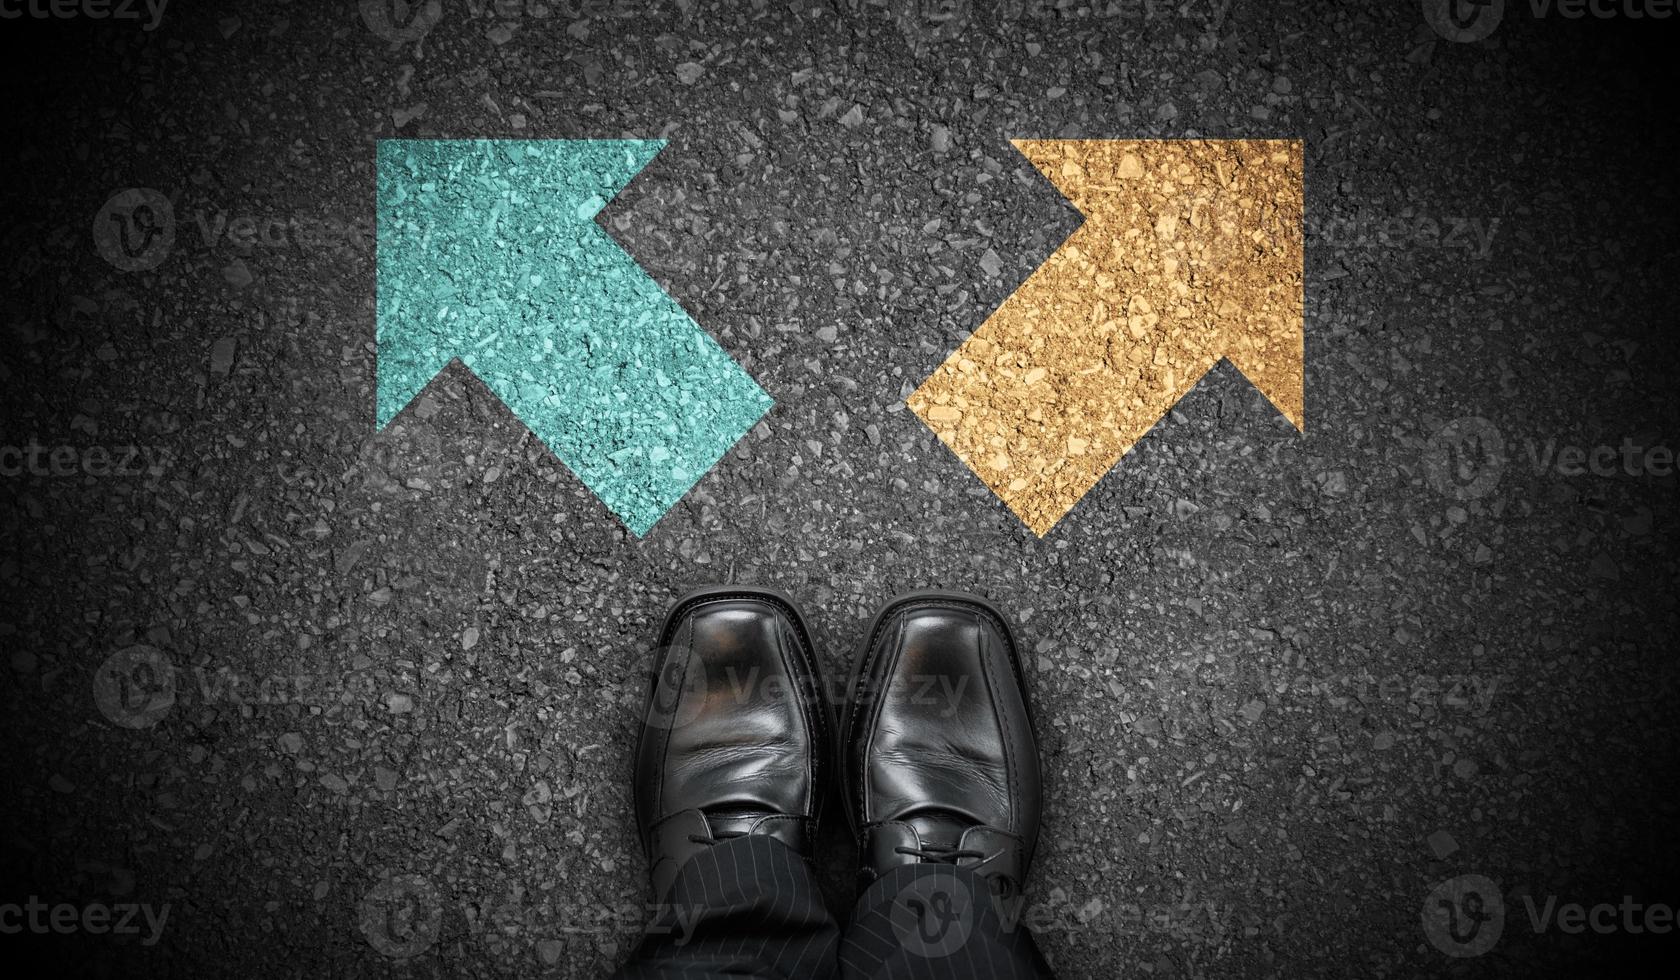 Black Business Shoes and Two Colorful Chalky Arrows on Asphalt - Choice Concept photo